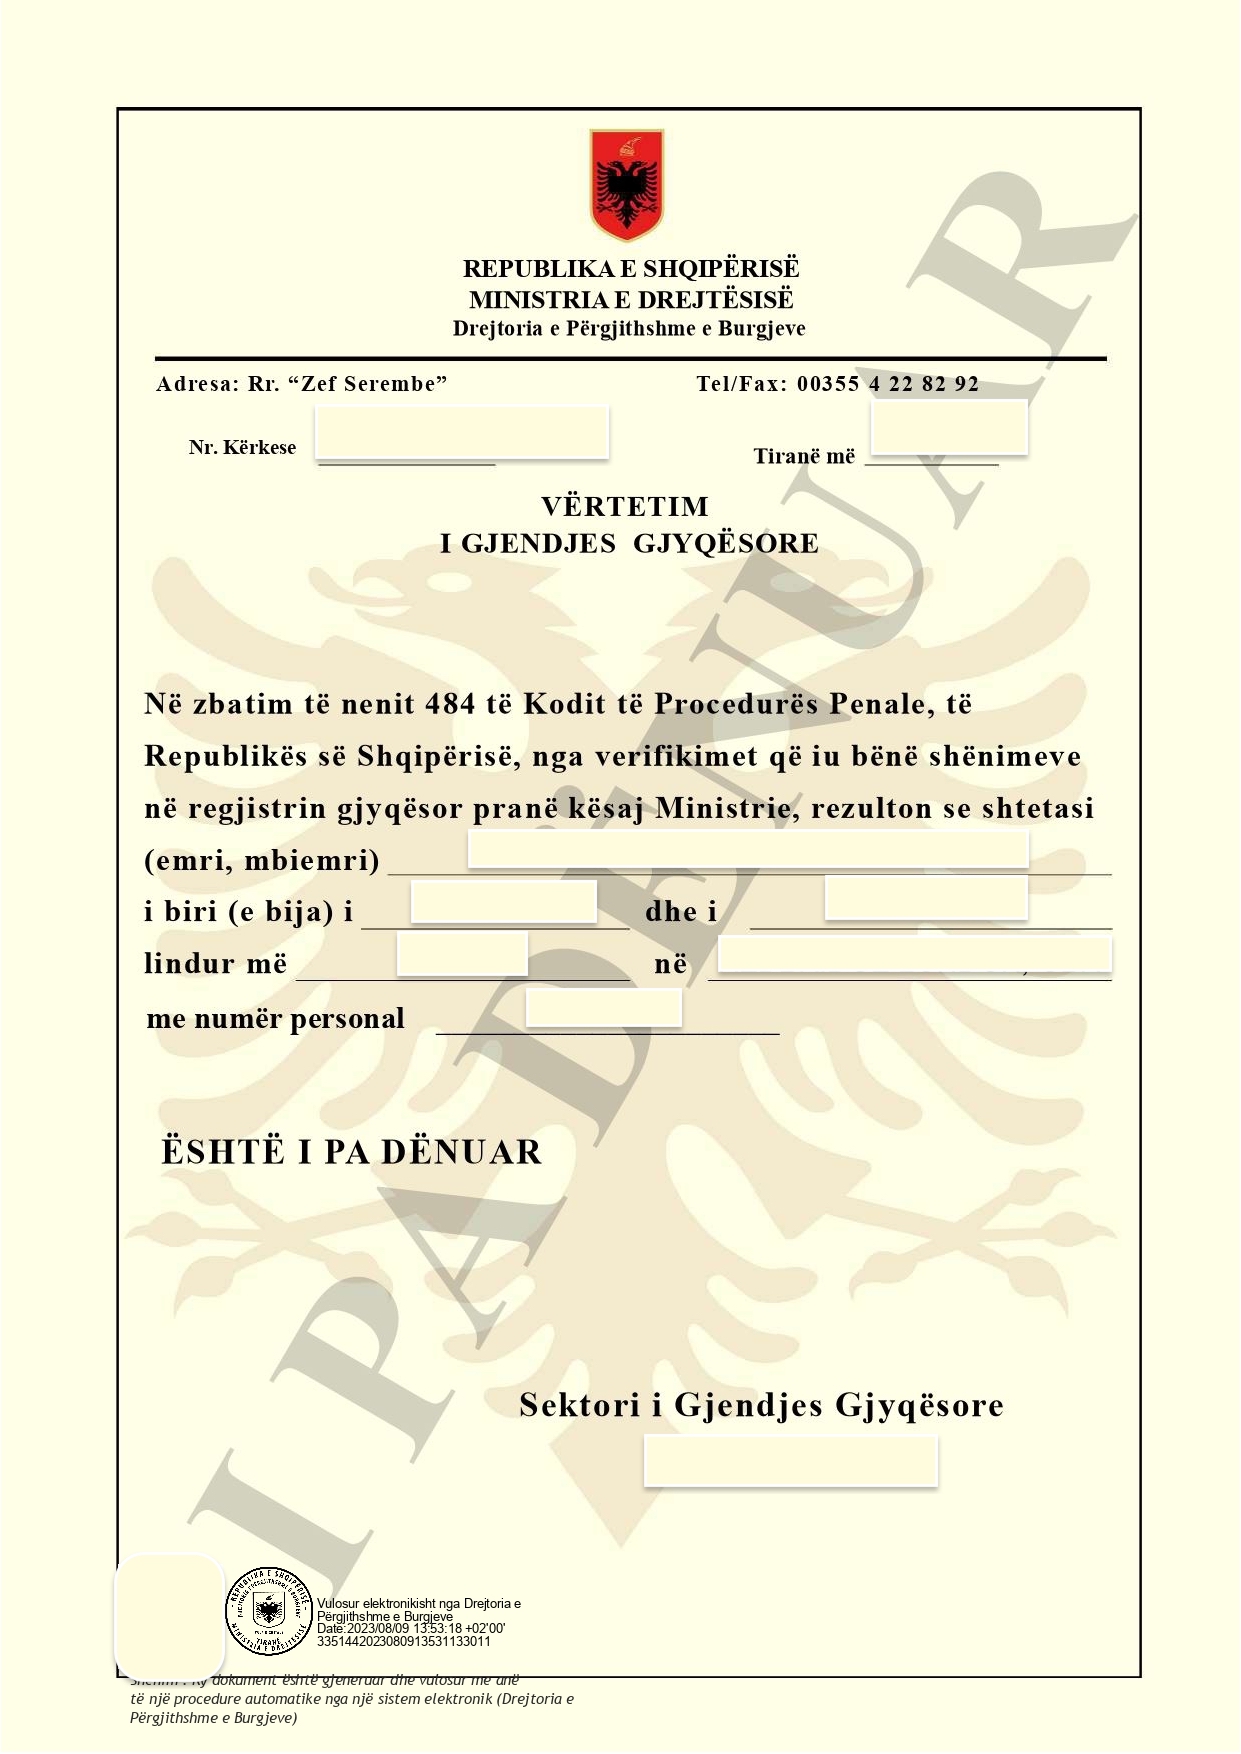 Certified Translation of Albanian Criminal Record Certificate from Albanian to English